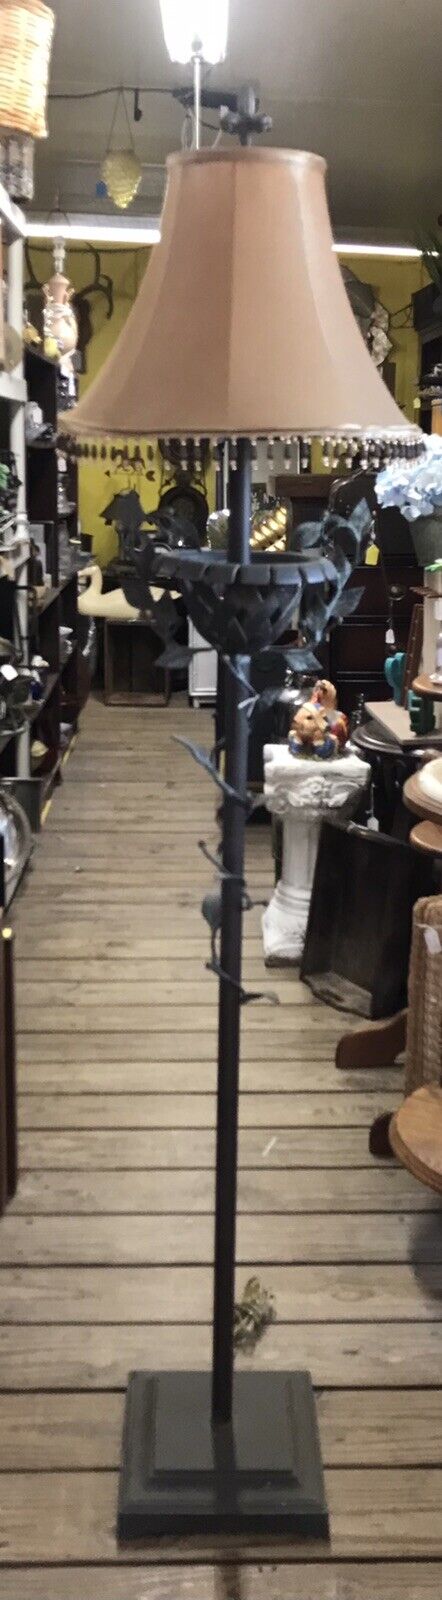 HARD TO FIND FREDERIC COOPER CAST IRON FLOOR LAMP.FLORAL/LEAF PATTERN.